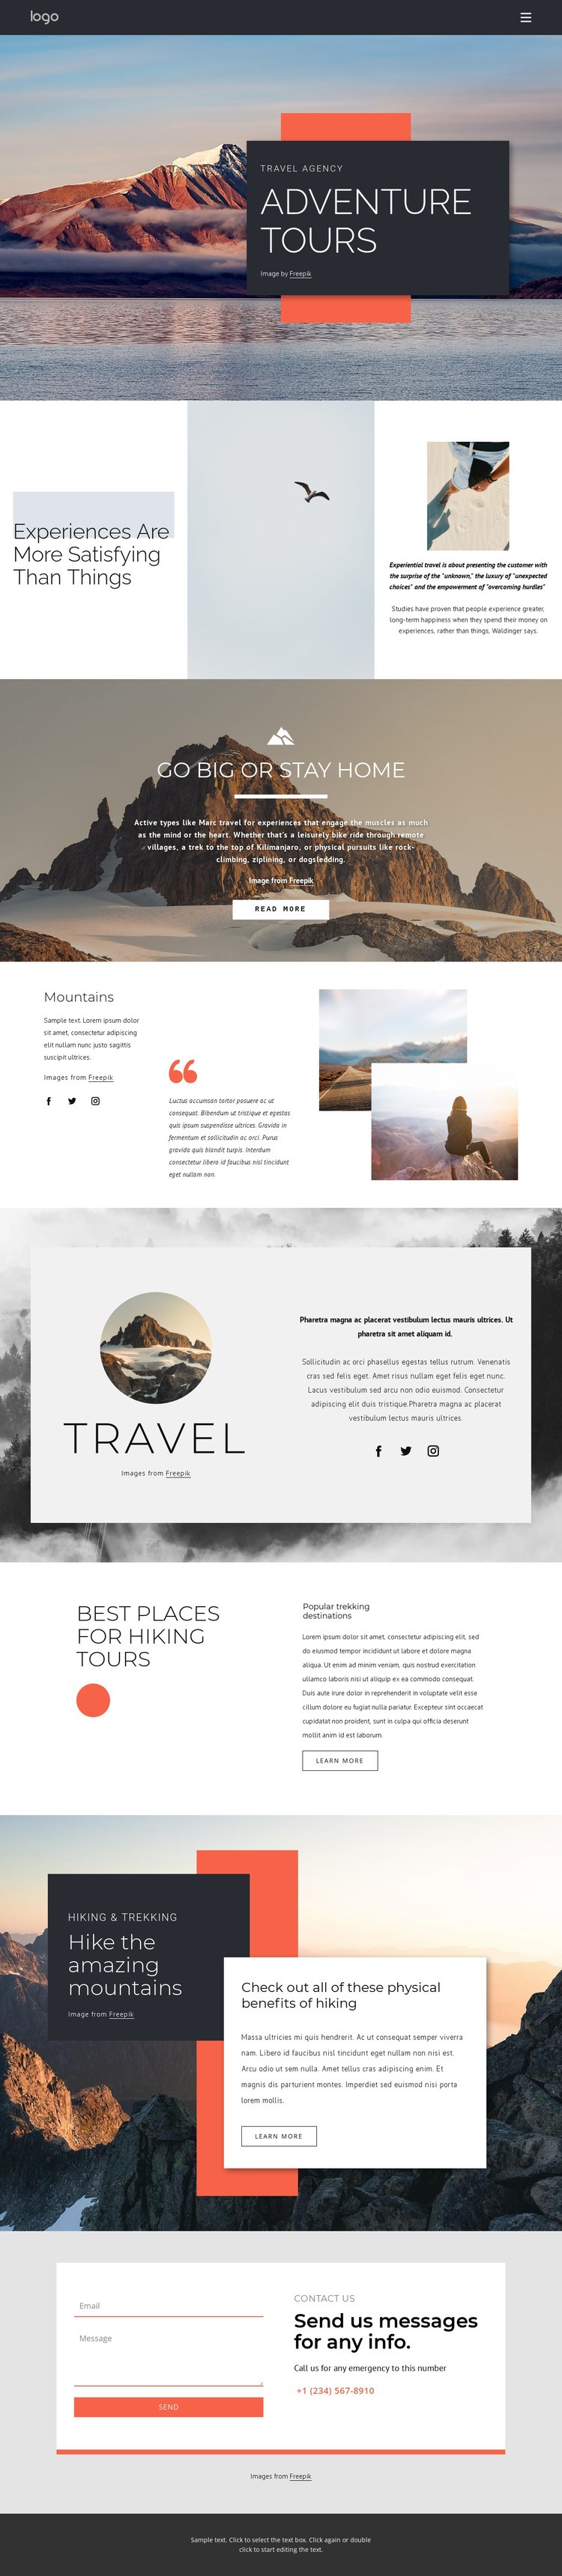 We provide hiking tours Web Page Design